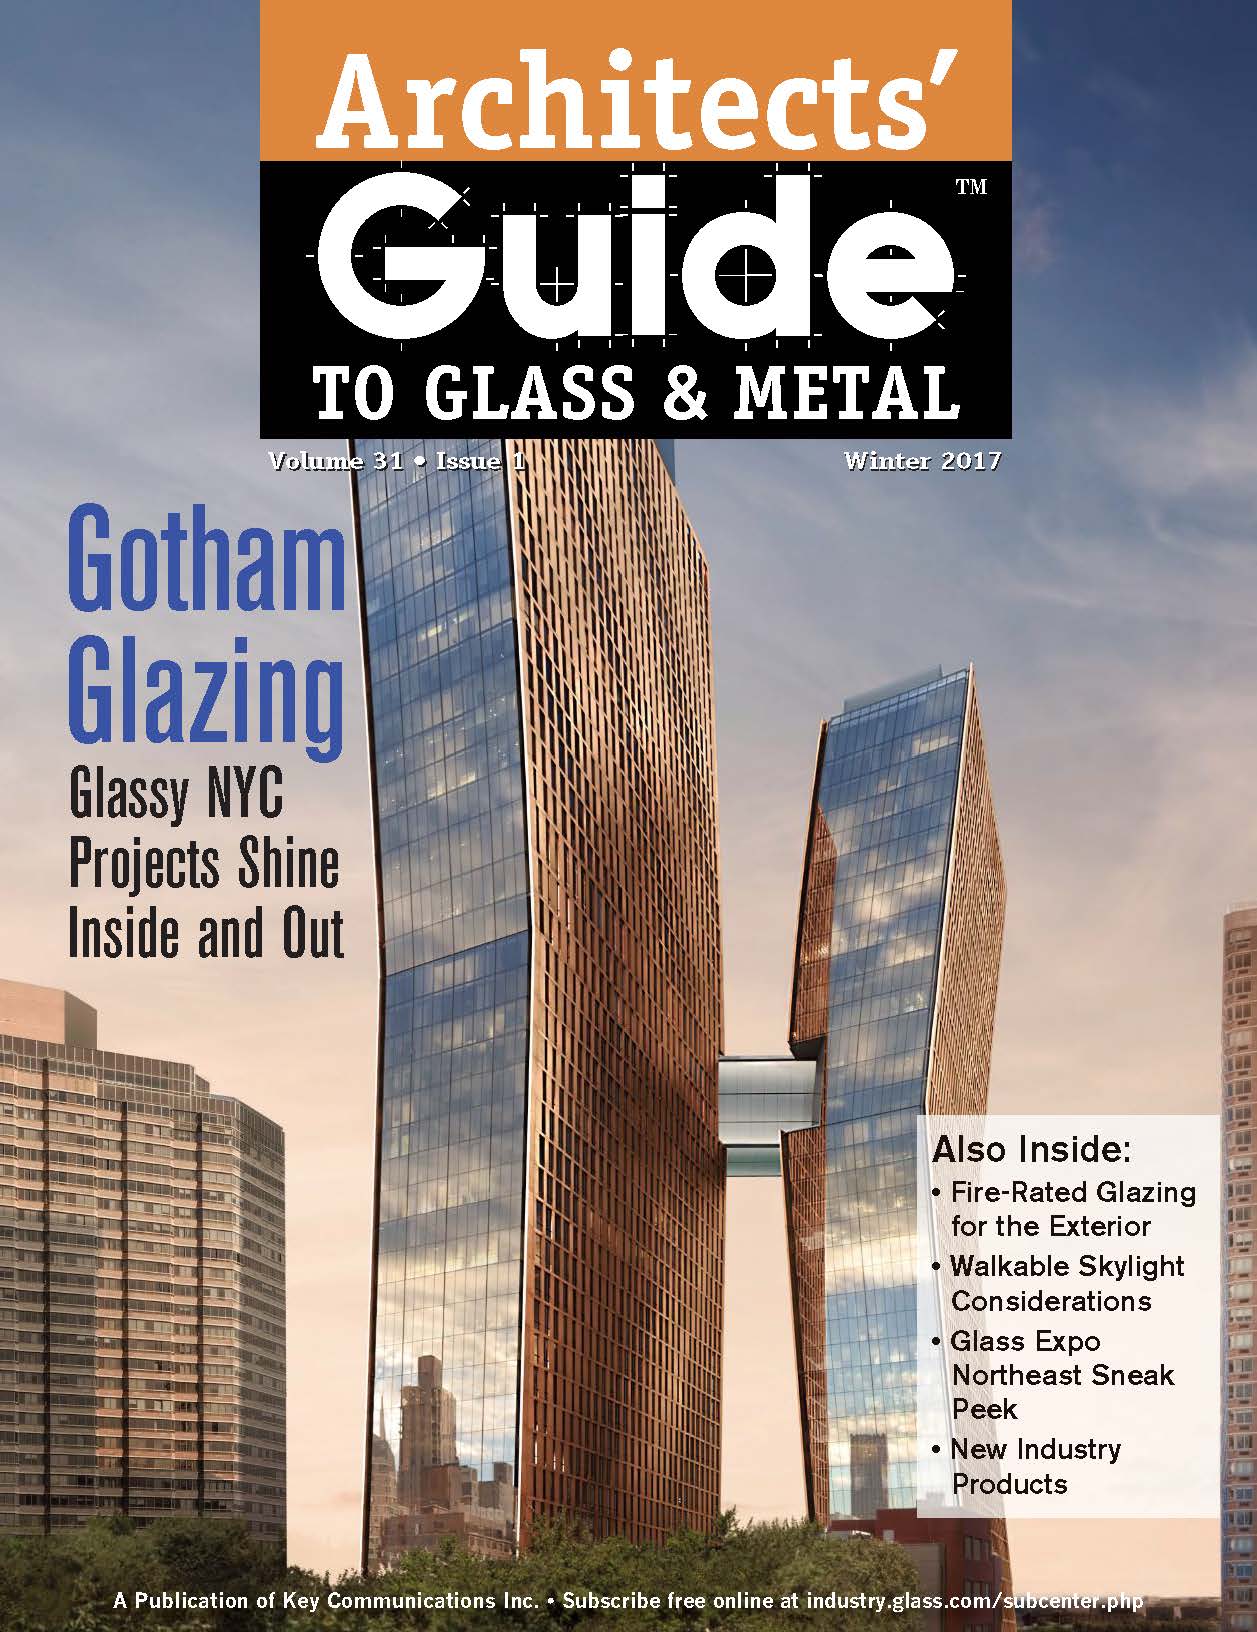 The cover of the 2017 Winter Edition of Architects Guide to Glass & Metal